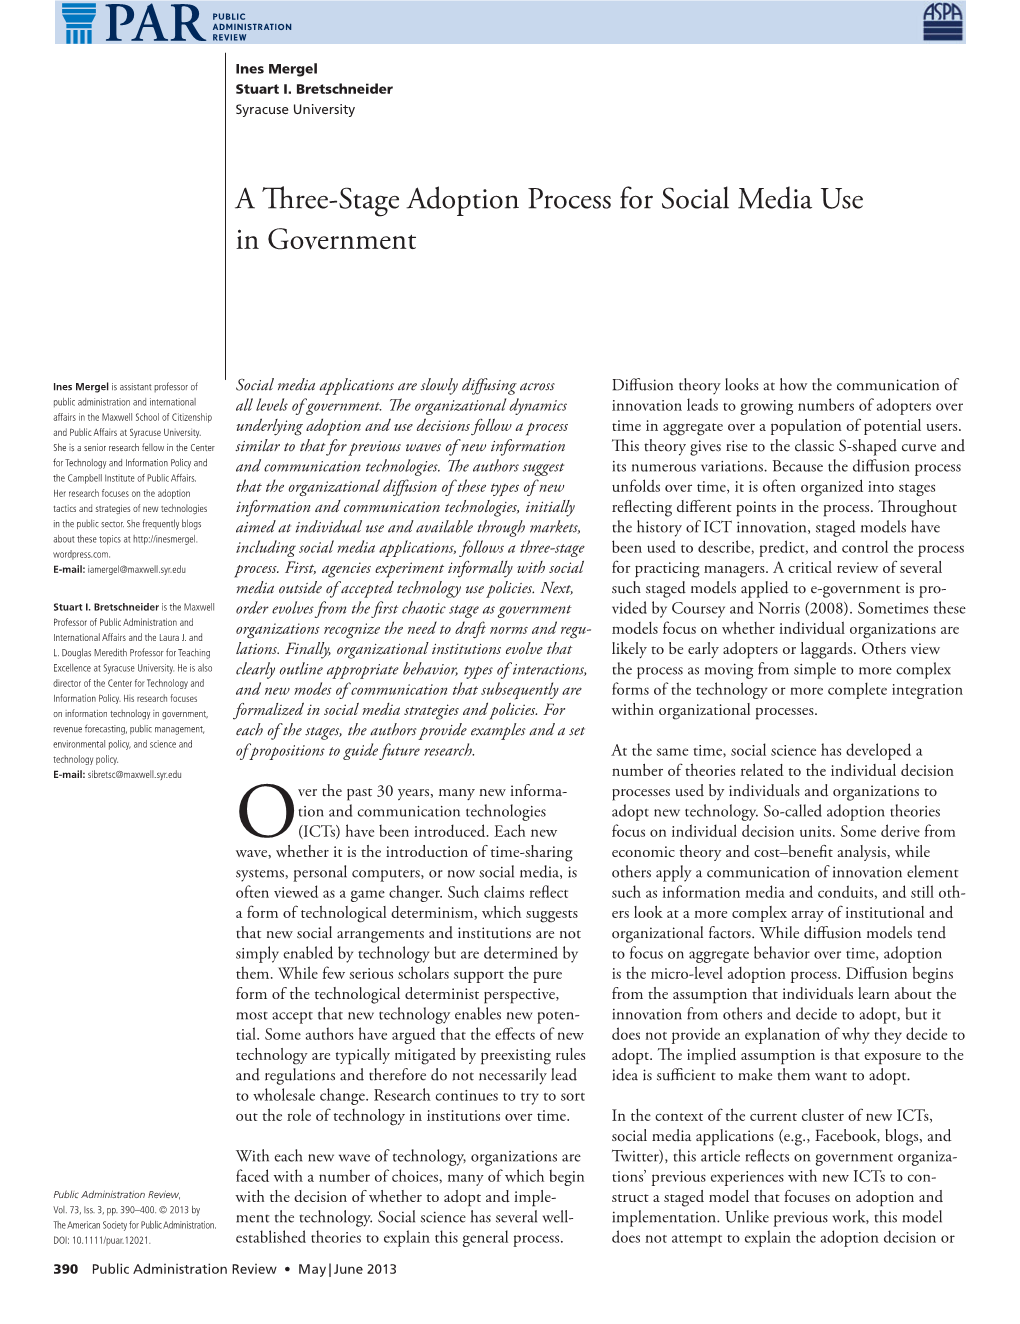 A Threestage Adoption Process for Social Media Use in Government